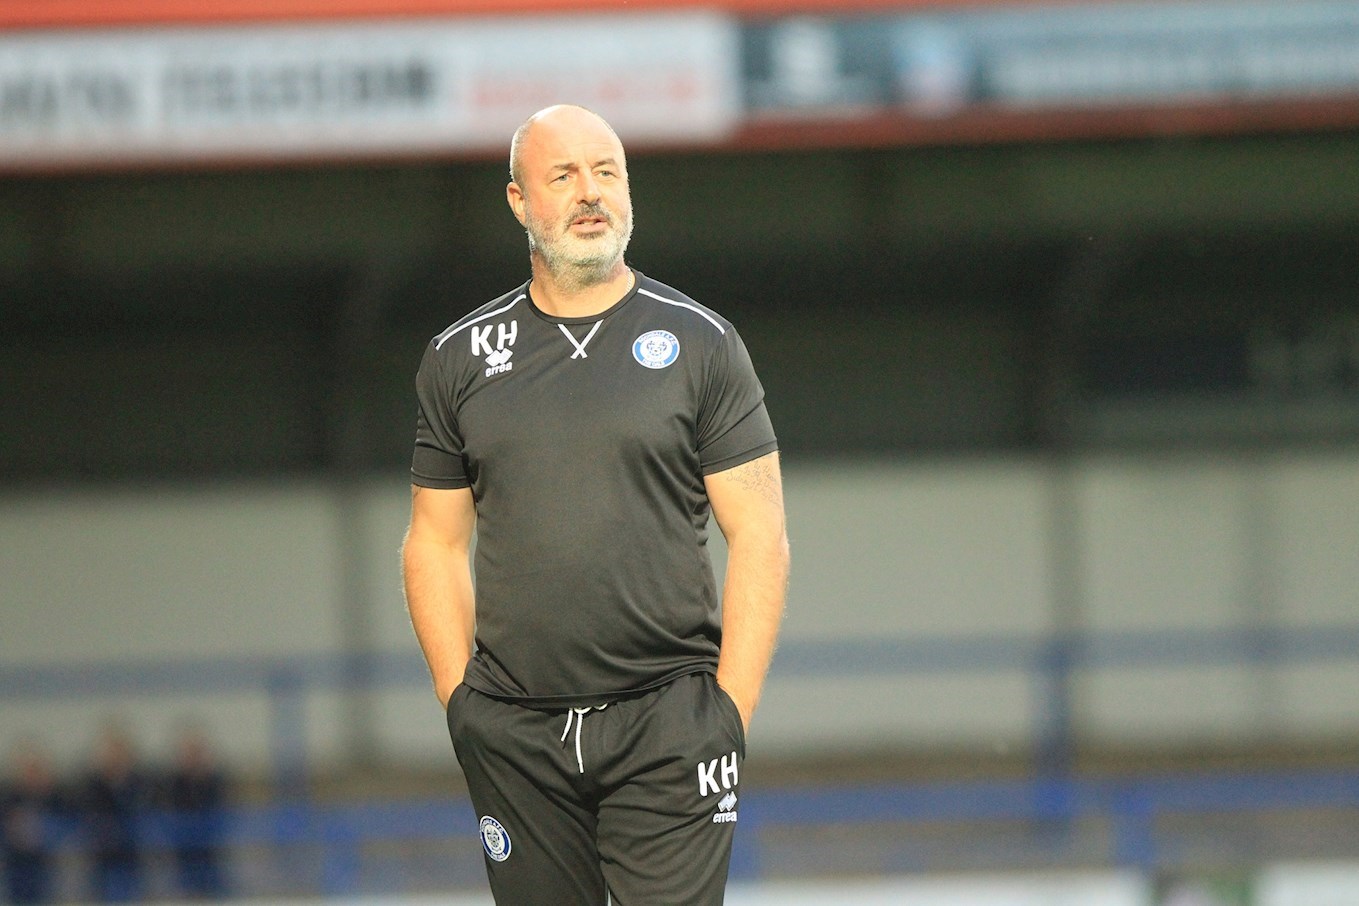 Keith Hill Prepared For Visit Of Doncaster Rovers - News - Rochdale AFC